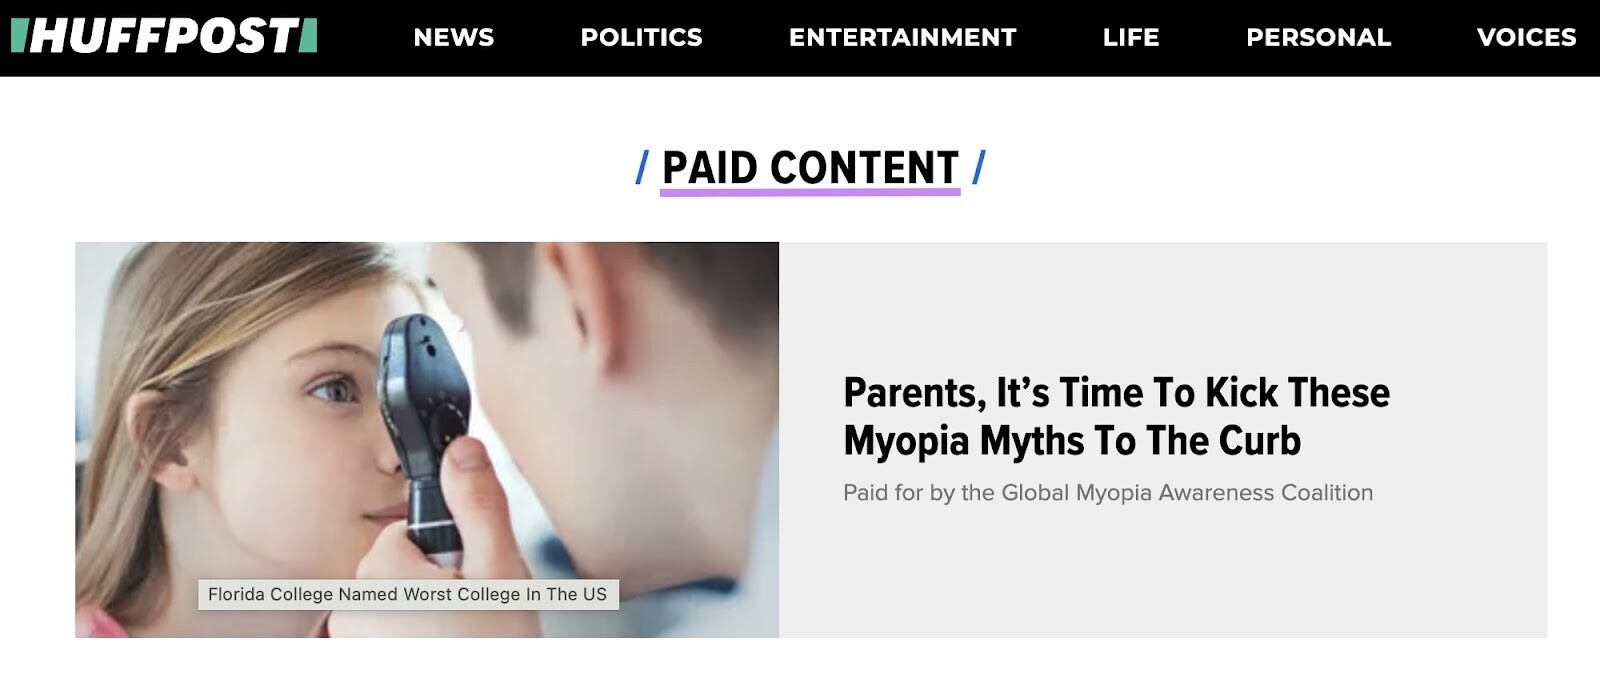 an example of sponsored content on HuffPost